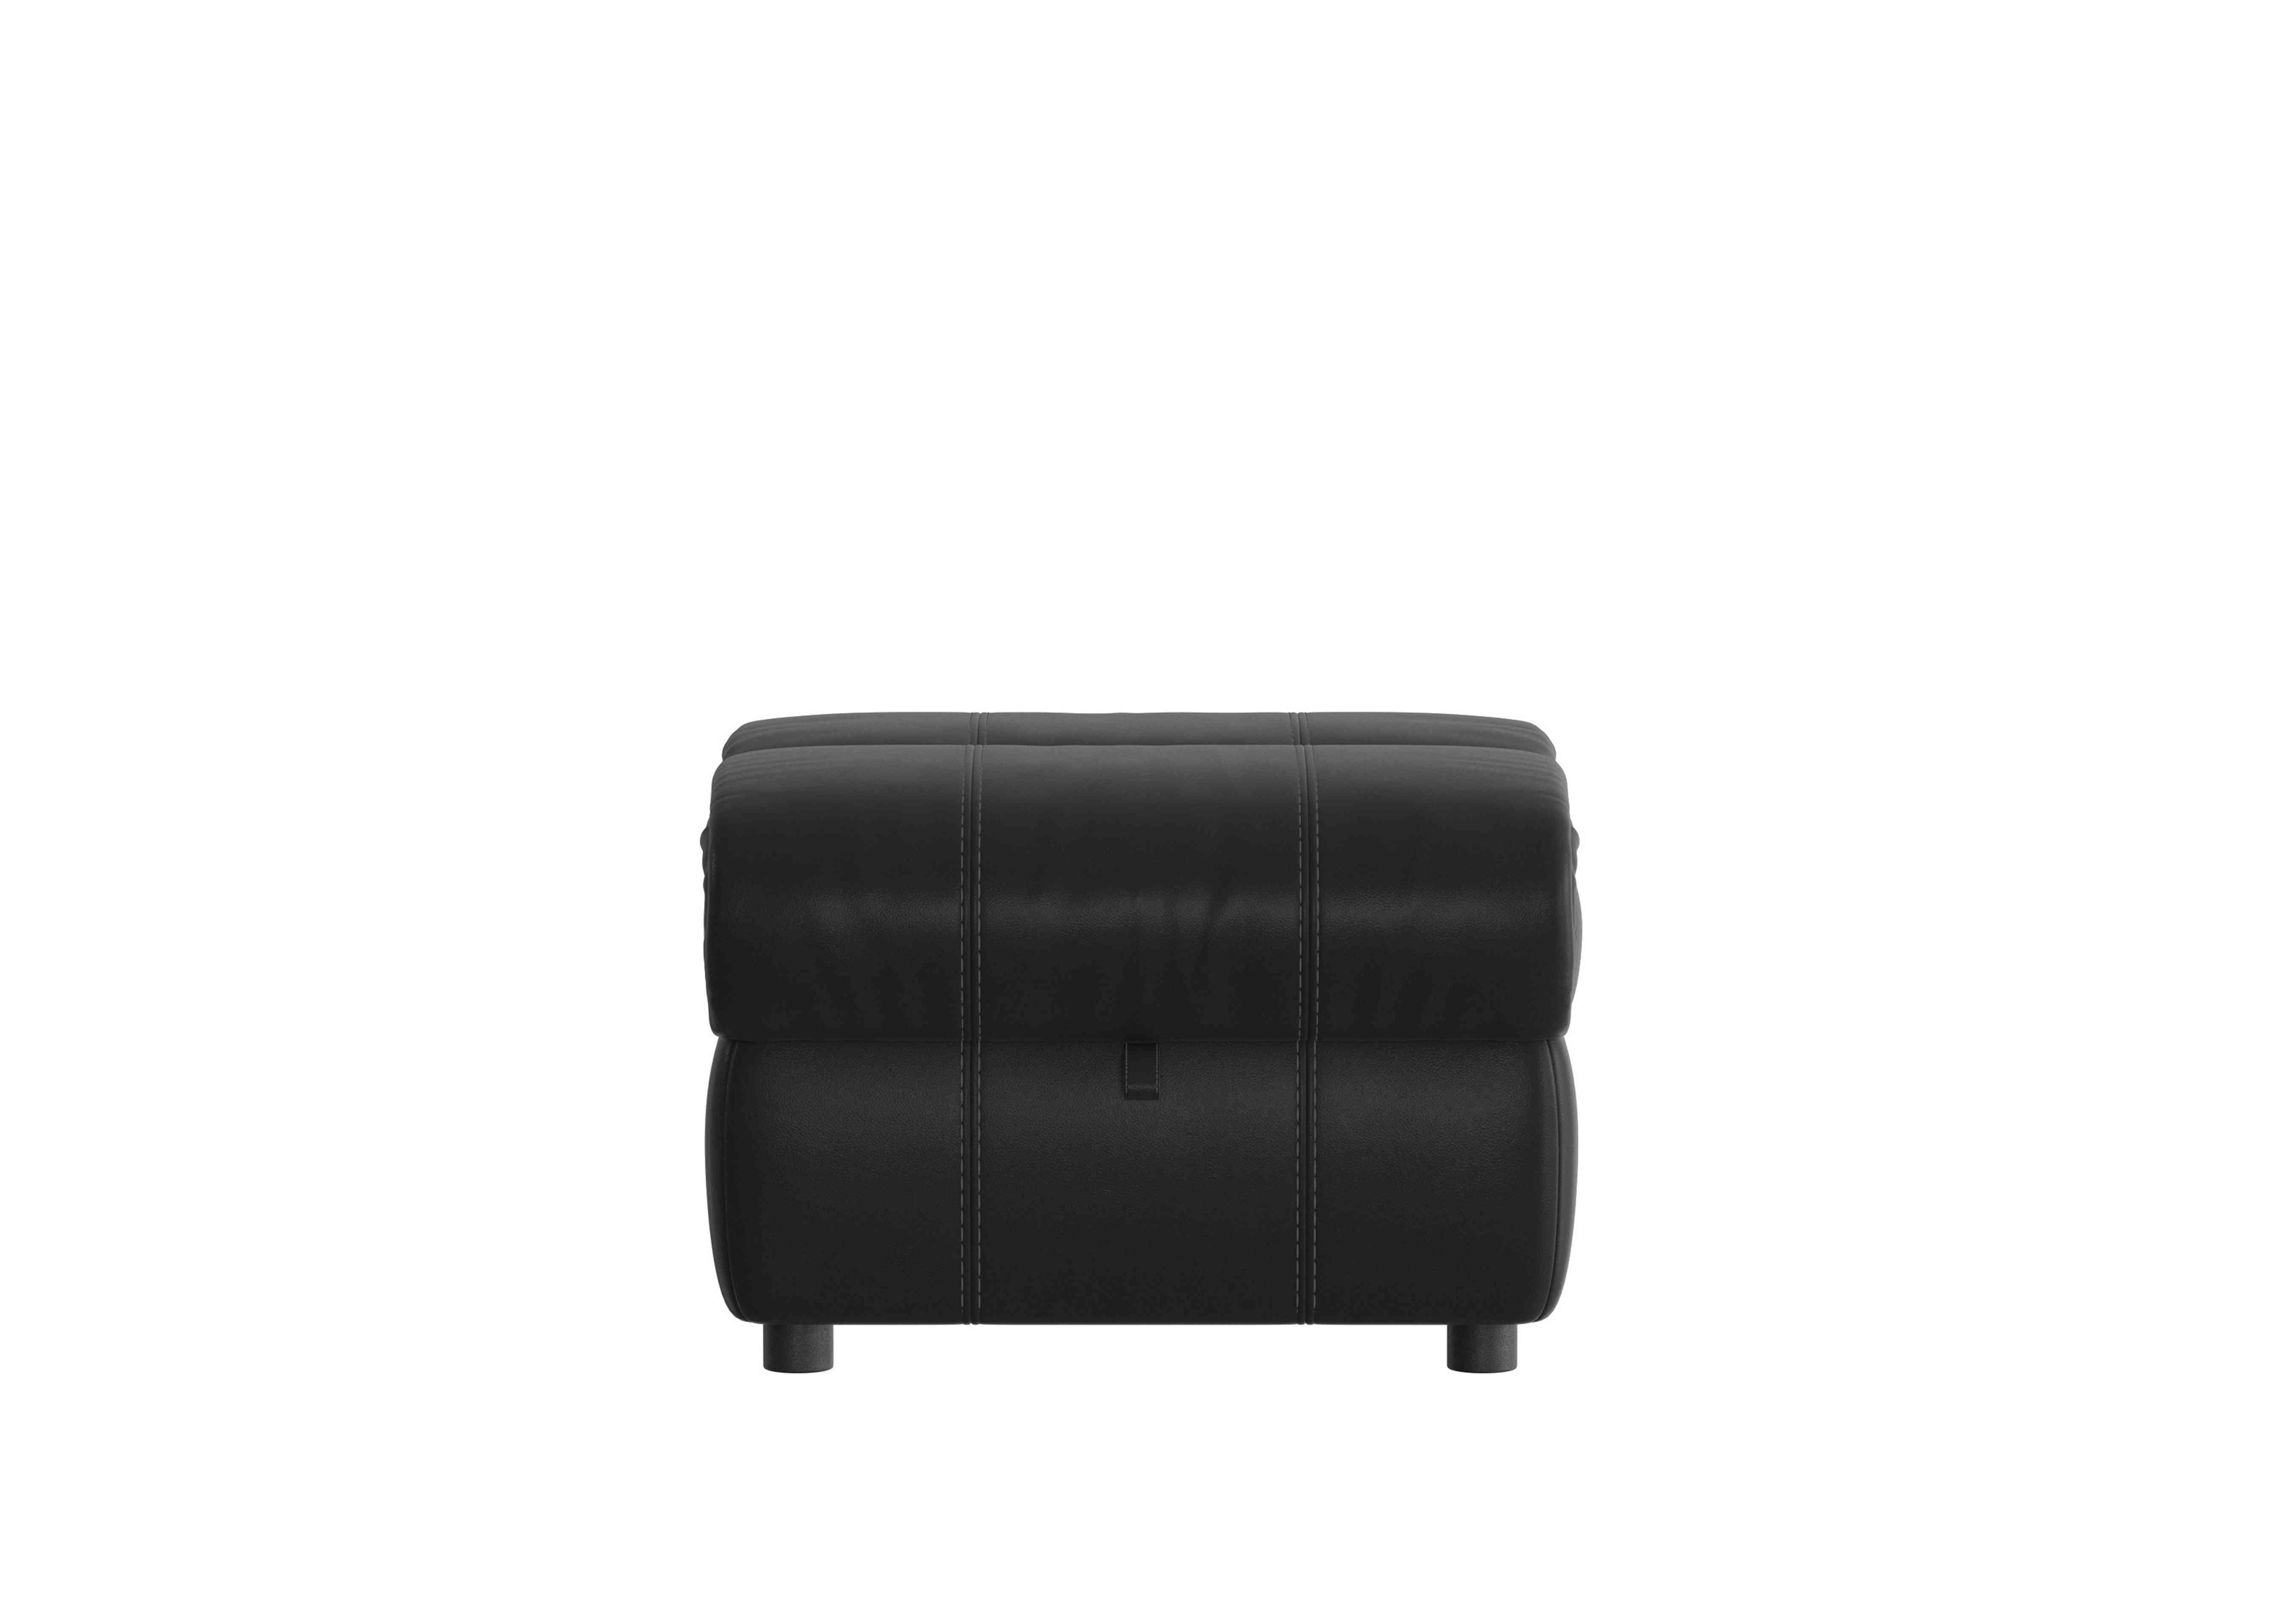 Link Leather Footstool in Bv-3500 Classic Black on Furniture Village